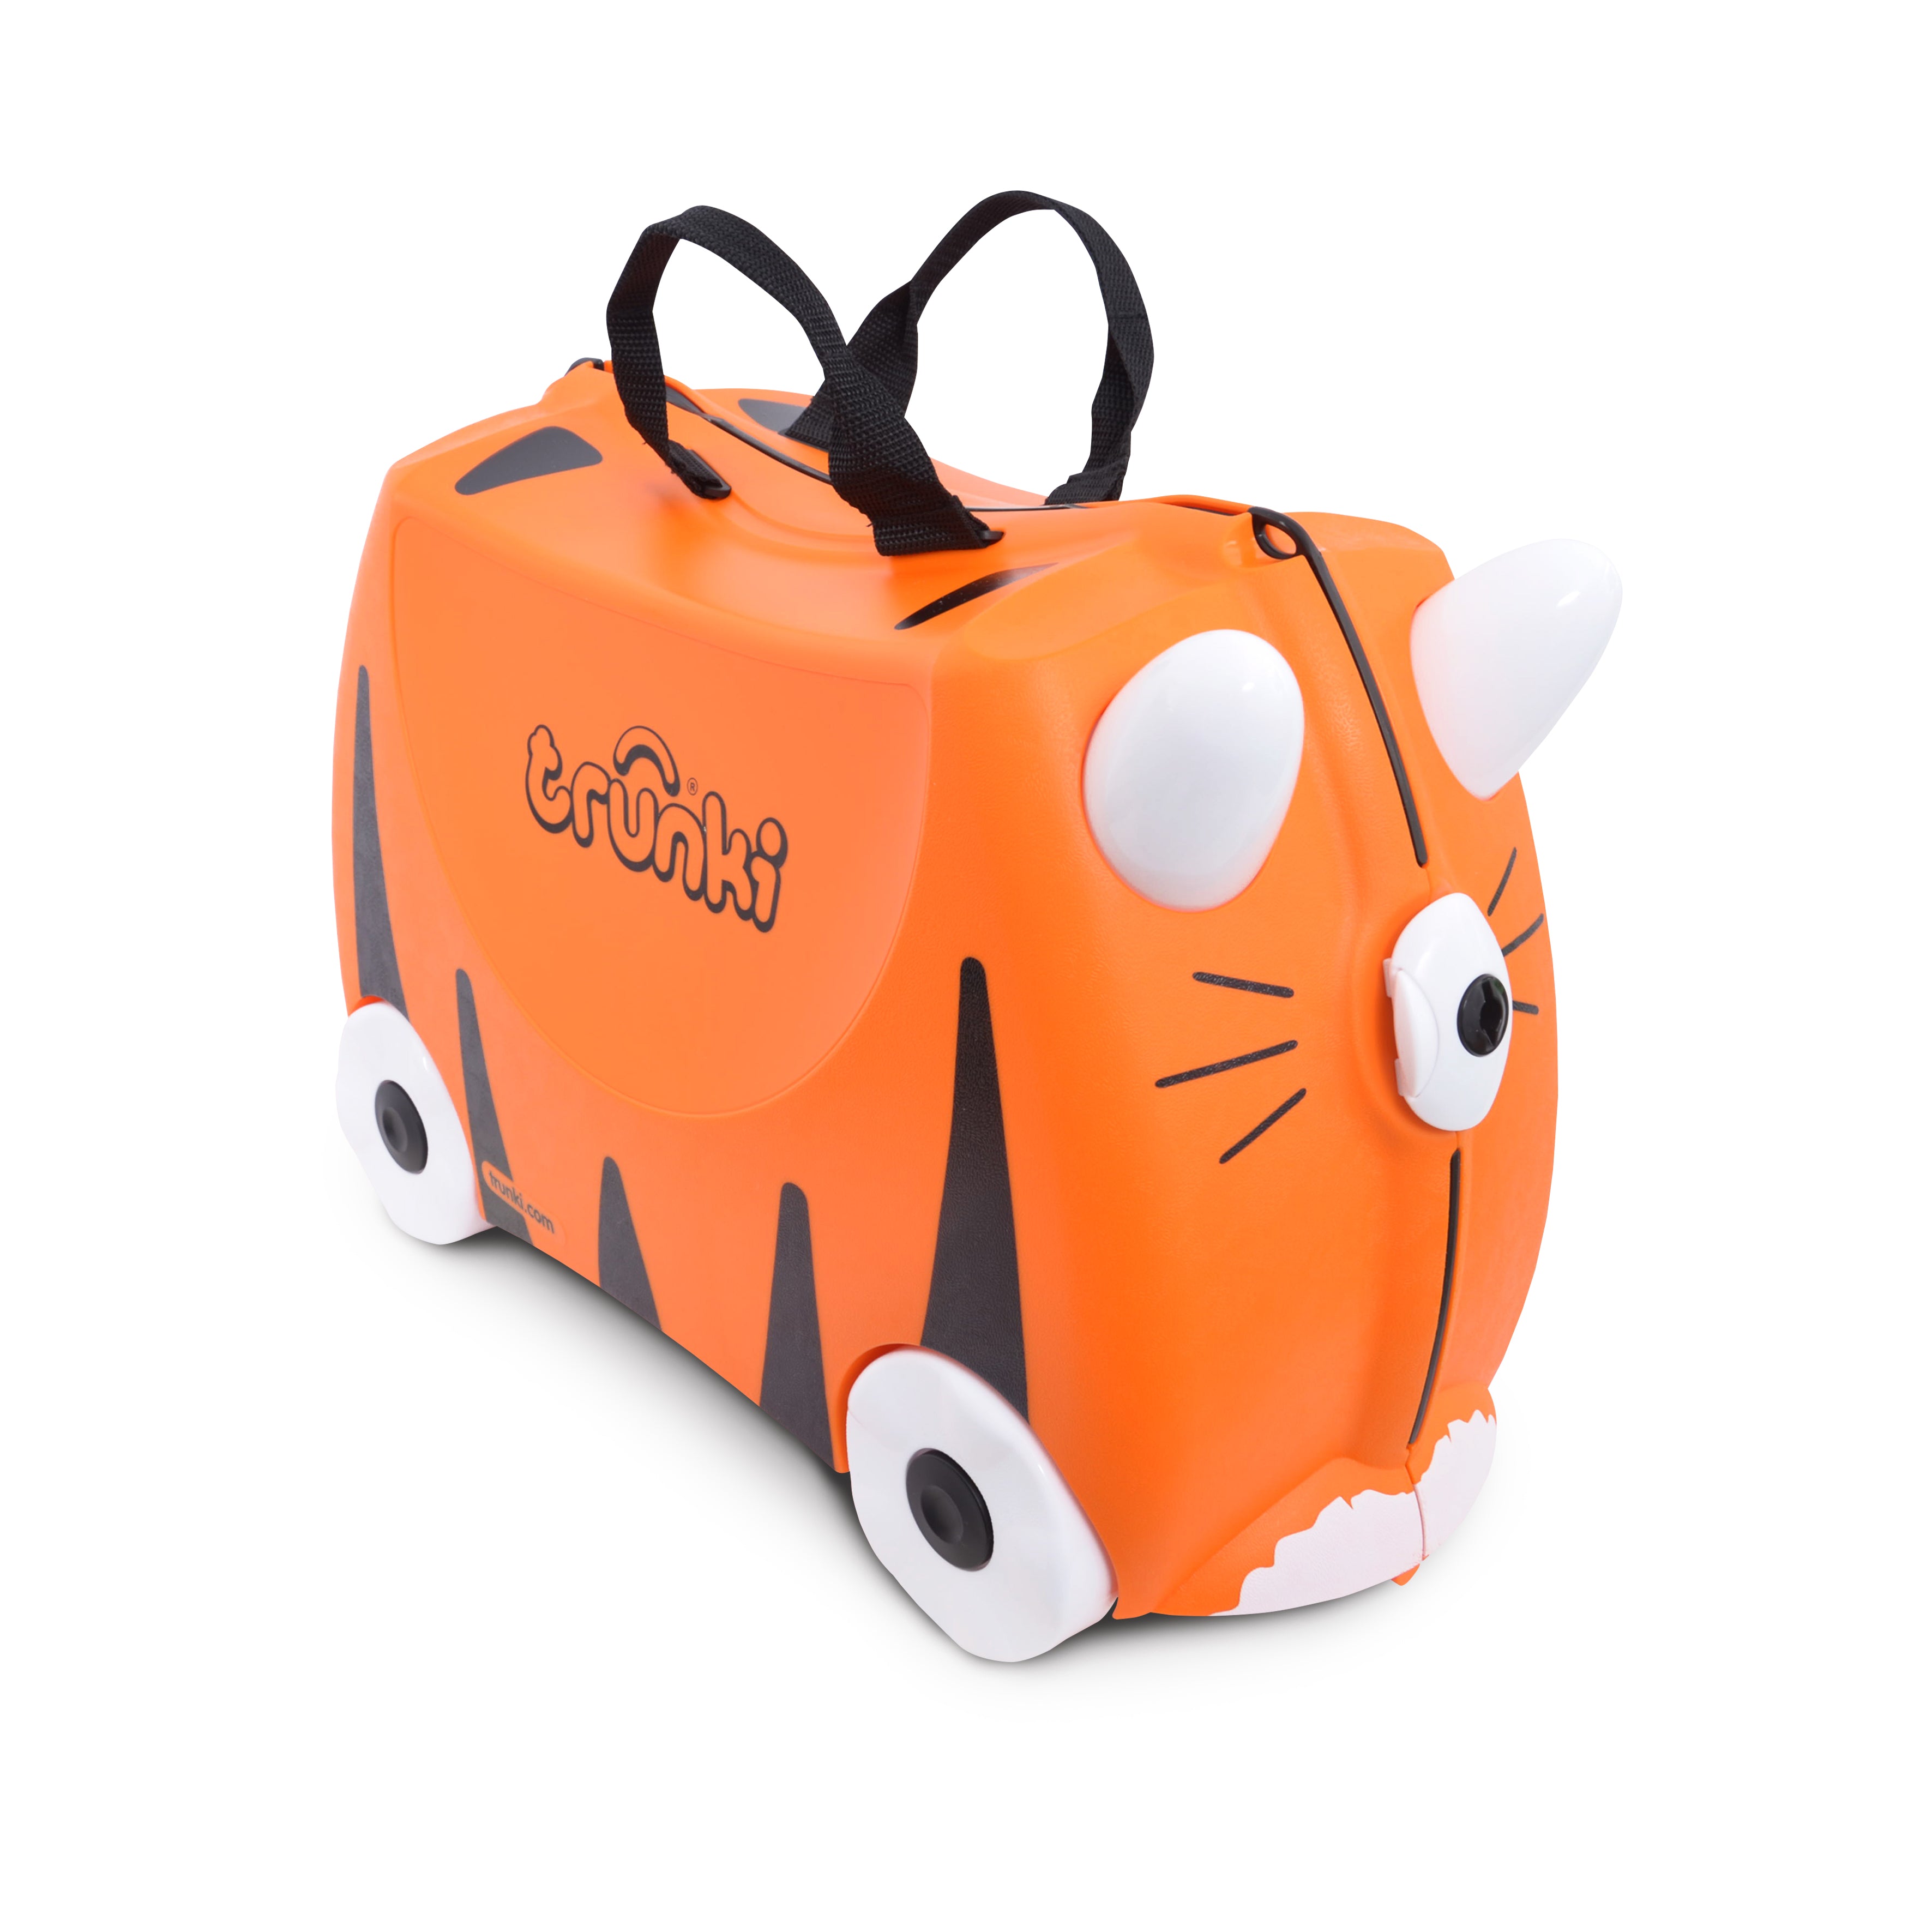 Trunki - Tipu Tiger, Children’s Ride-On Suitcase & Kid's Hand Luggage